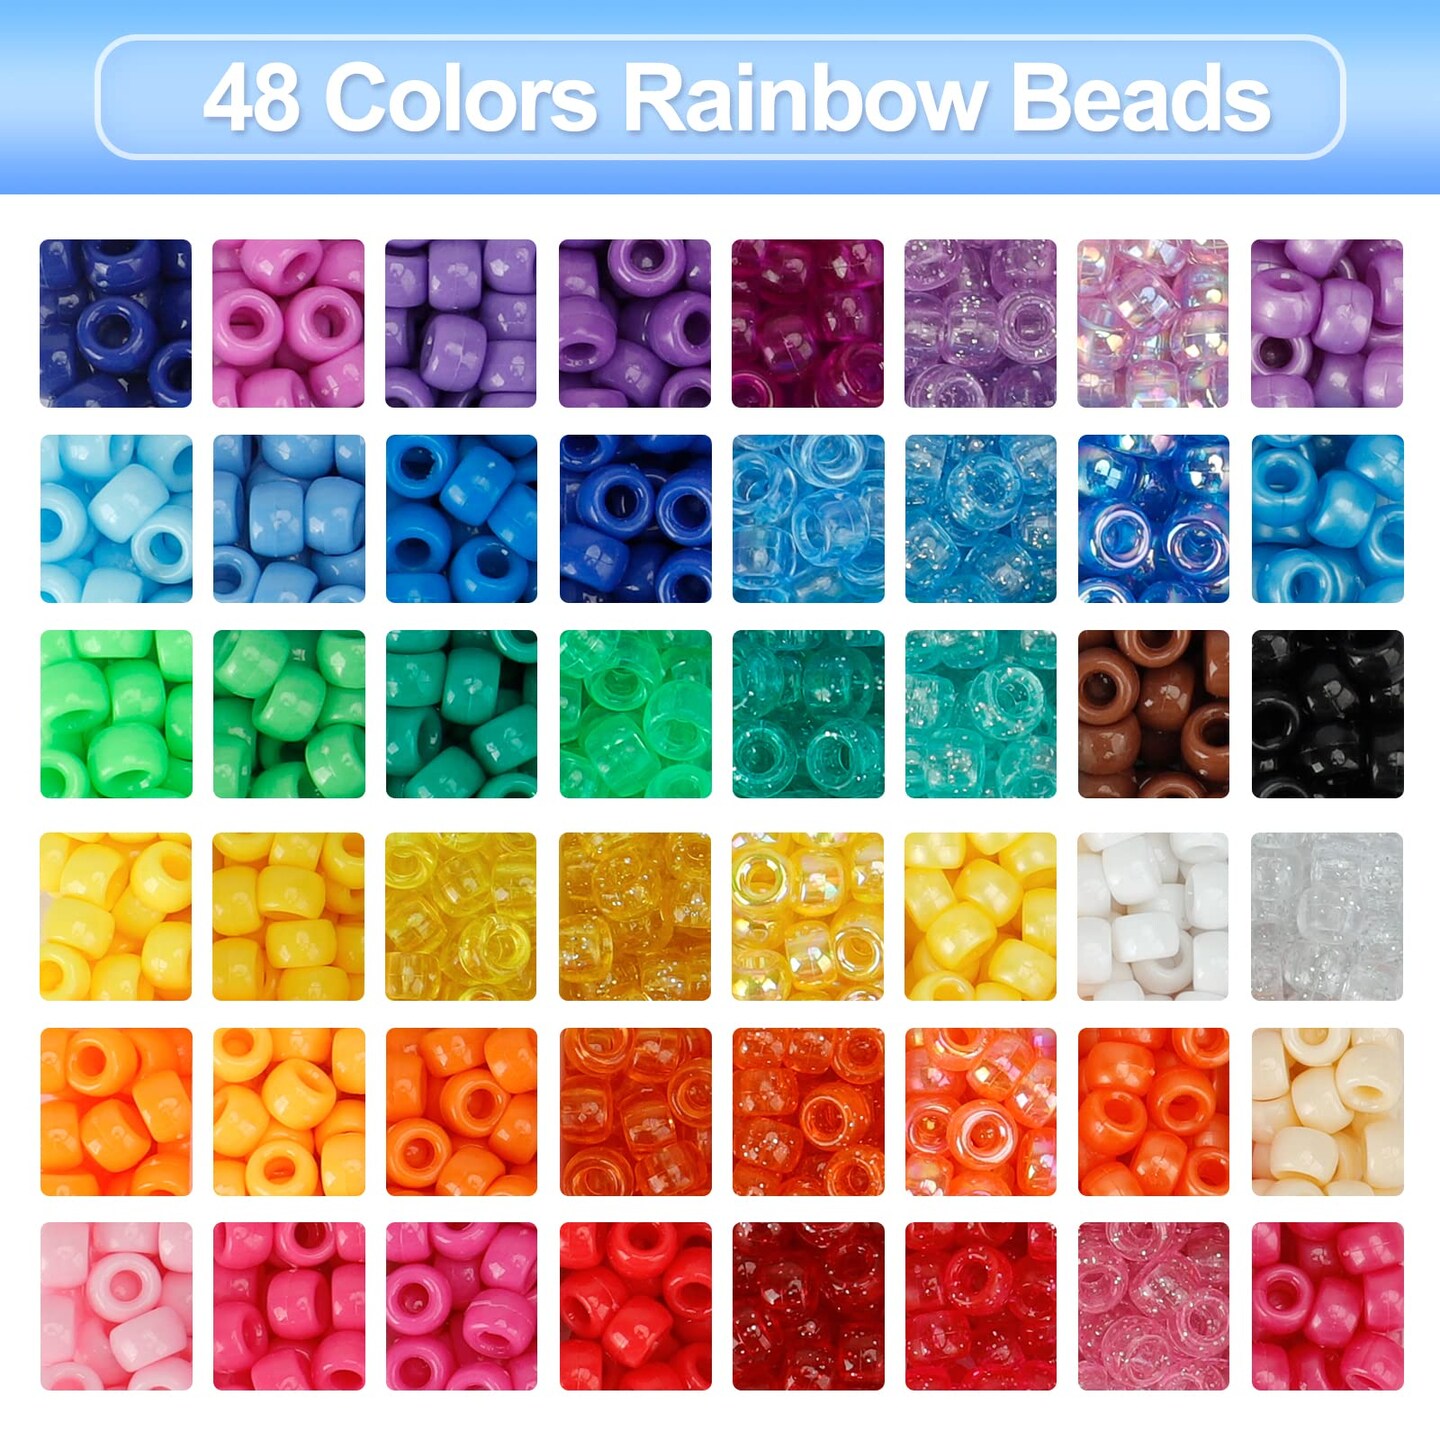 Quefe 3960pcs Pony Beads for Bracelet Making Kit 48 Colors Kandi Beads Set, 2400pcs Plastic Rainbow Bead Bulk and 1560pcs Letter Beads with 20 Meter Elastic Threads for Craft Jewelry Necklace